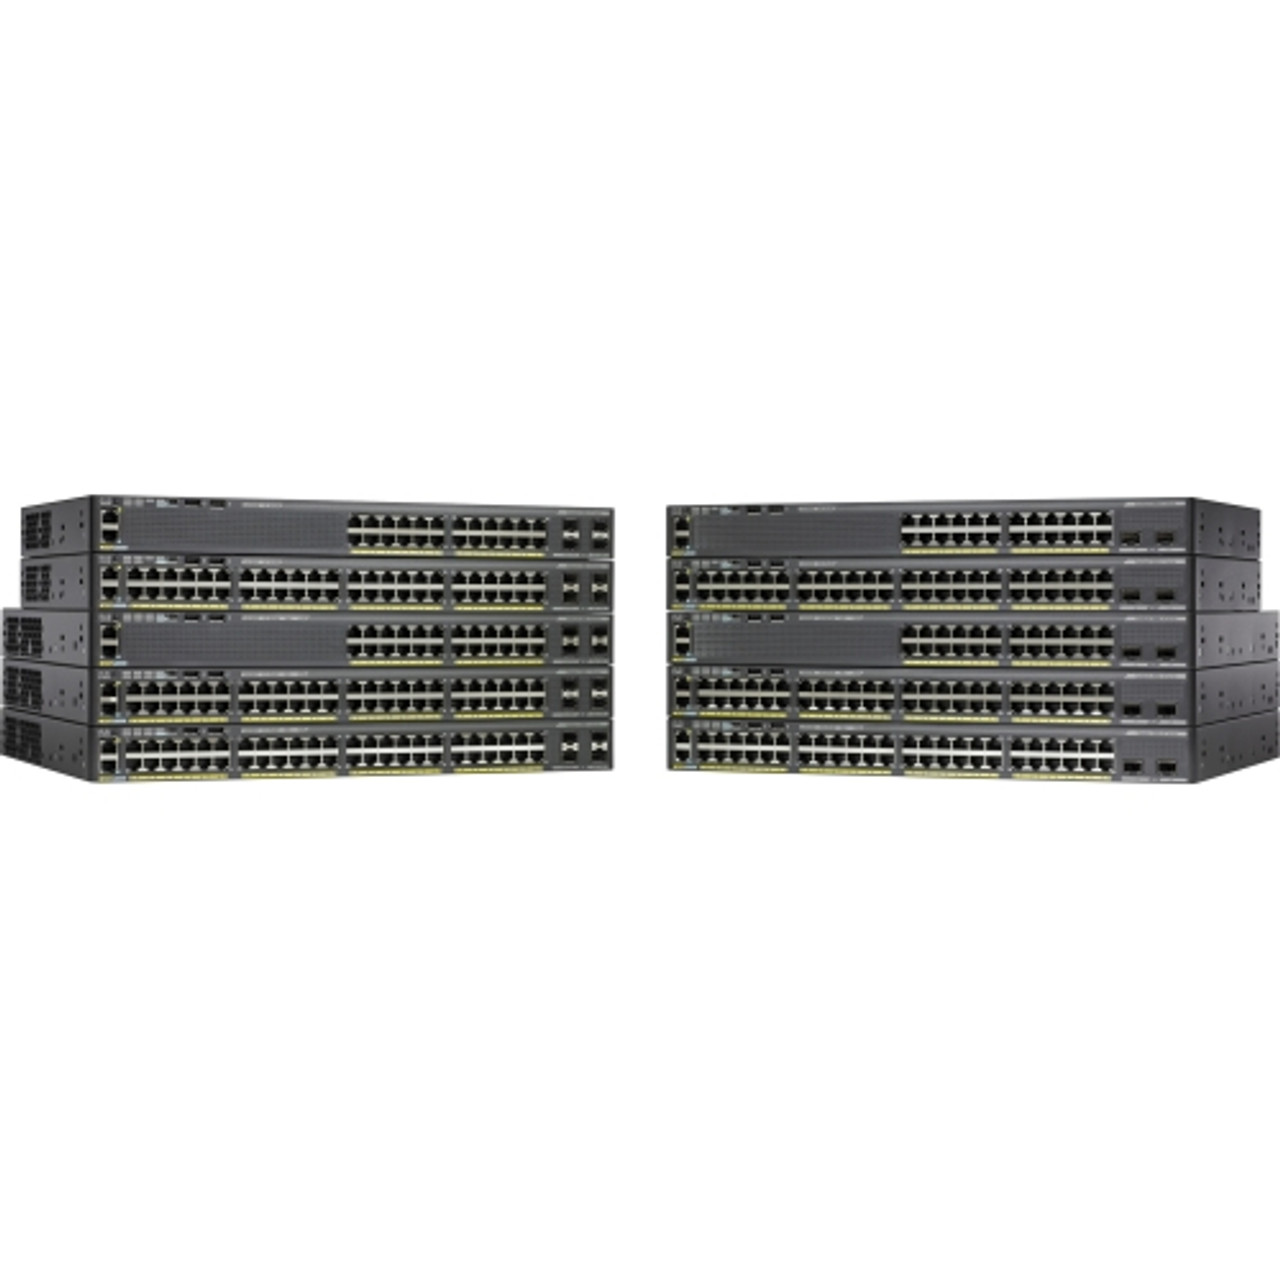 C1-C2960X-24PS-L Cisco Catalyst 2960X-24PS-L 24-Ports RJ-45 10/100/1000 PoE+ Managed Stackable Layer3 Switch with 4x Gigabit SFP Ports (Refurbished)